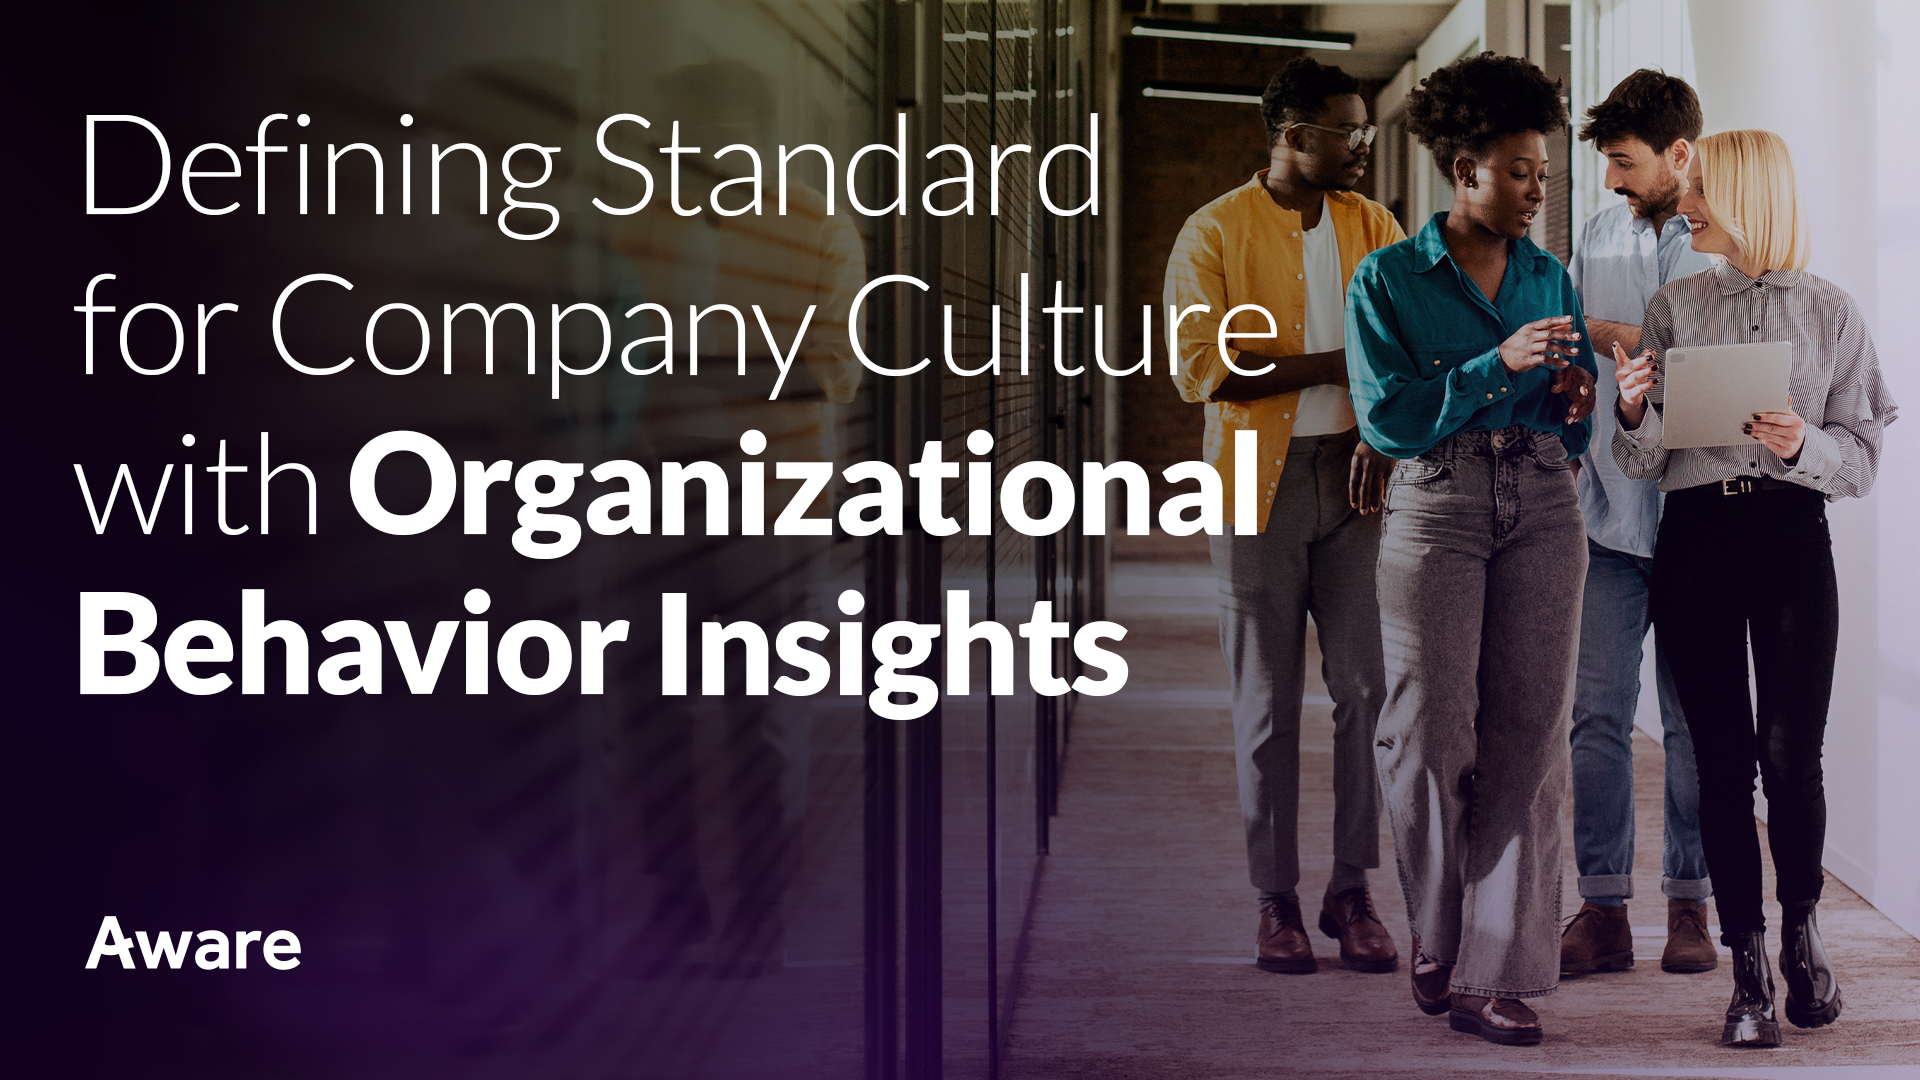 Defining Standard for Company Culture with Organizational Behavior Insights